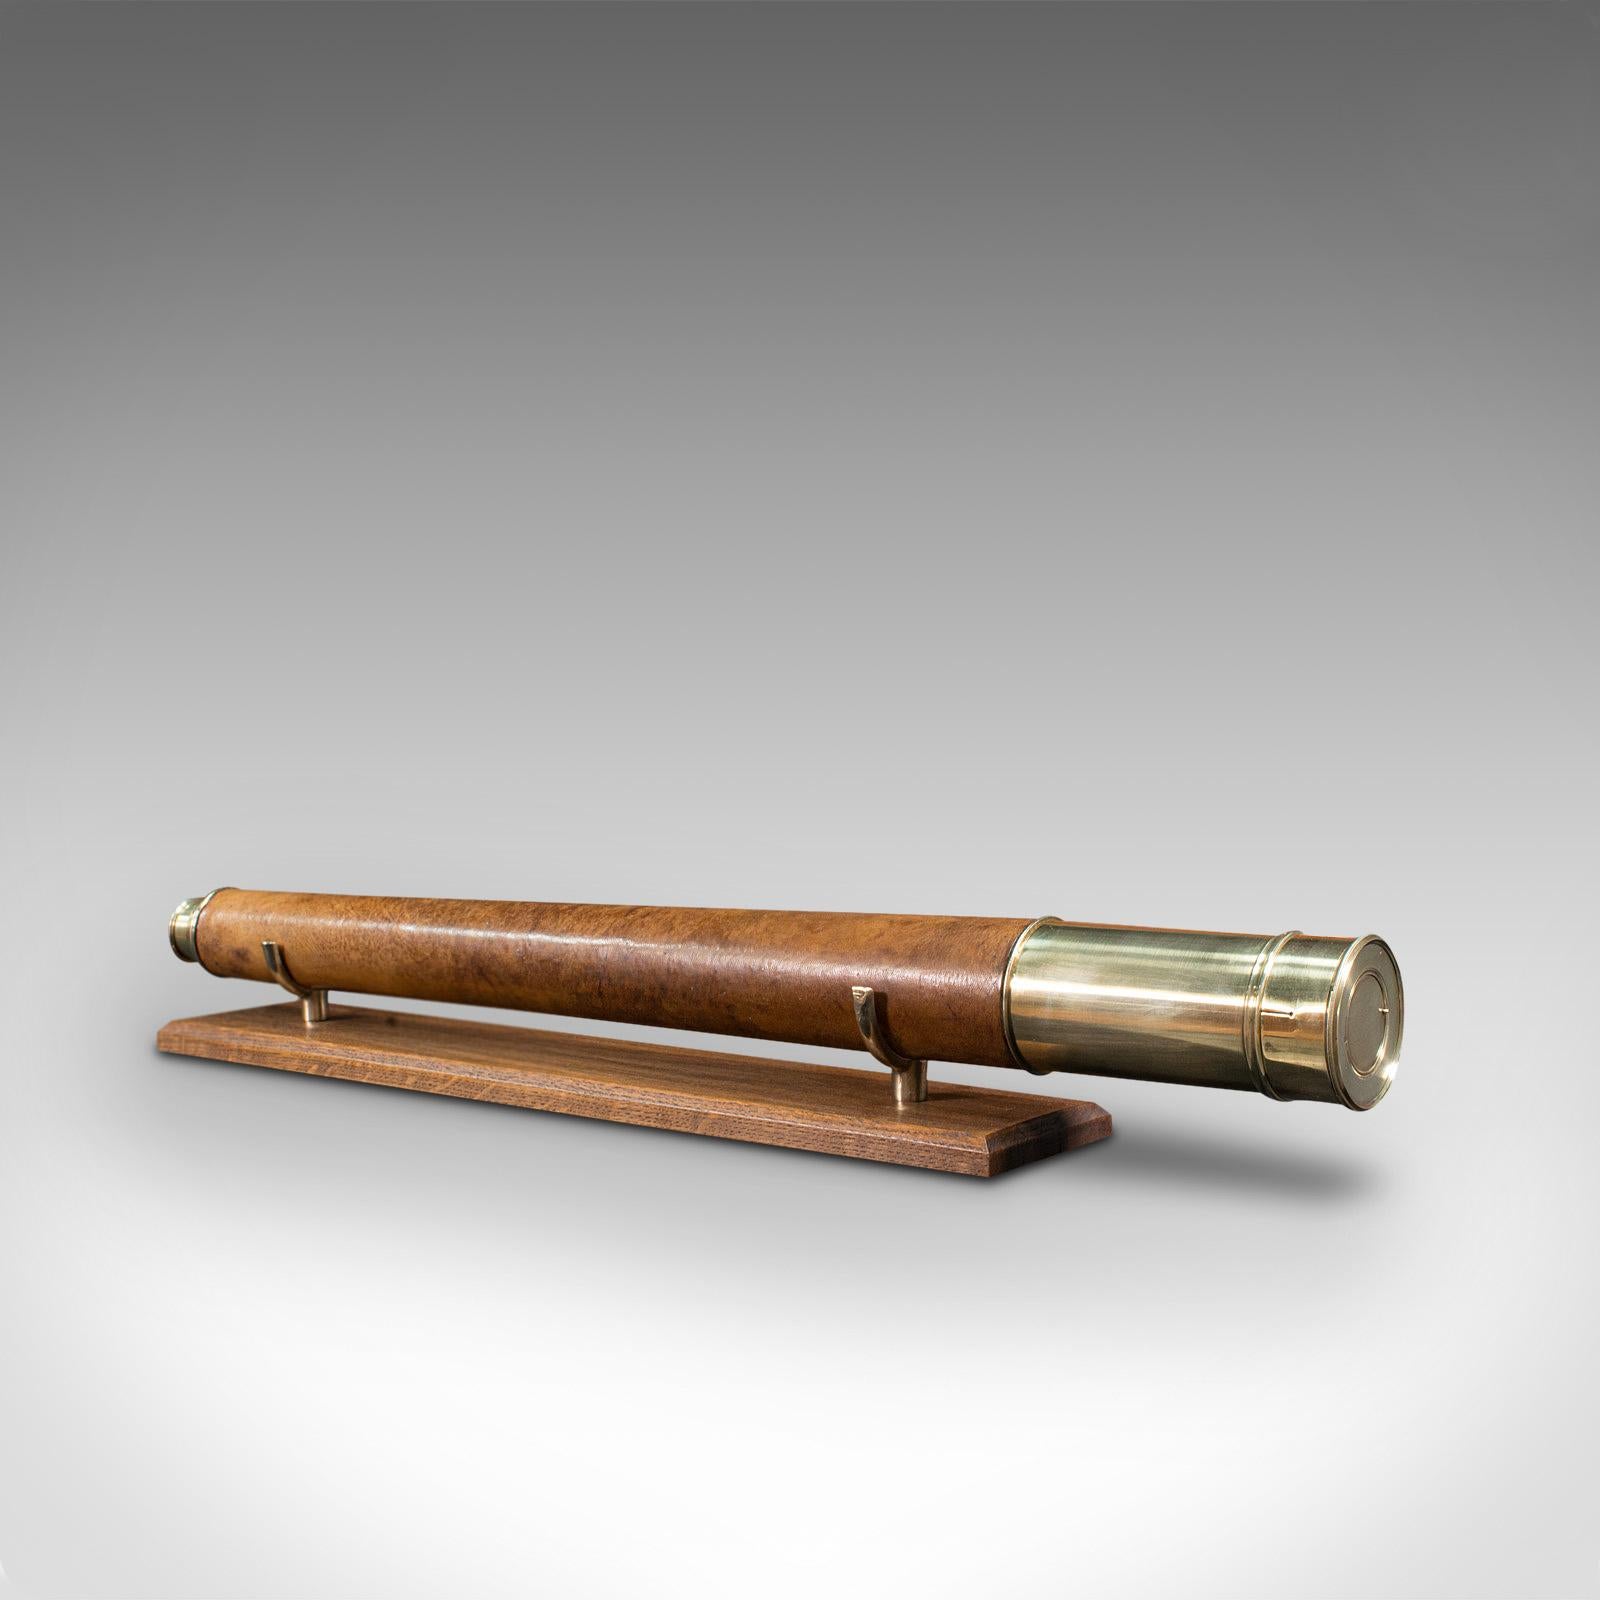 This is an antique terrestrial telescope. An English, single drawer refractor with National Service League mark, dating to the Victorian period, circa 1880.

Perfect for bird watching, landscape appreciation, wildlife, or maritime observation.